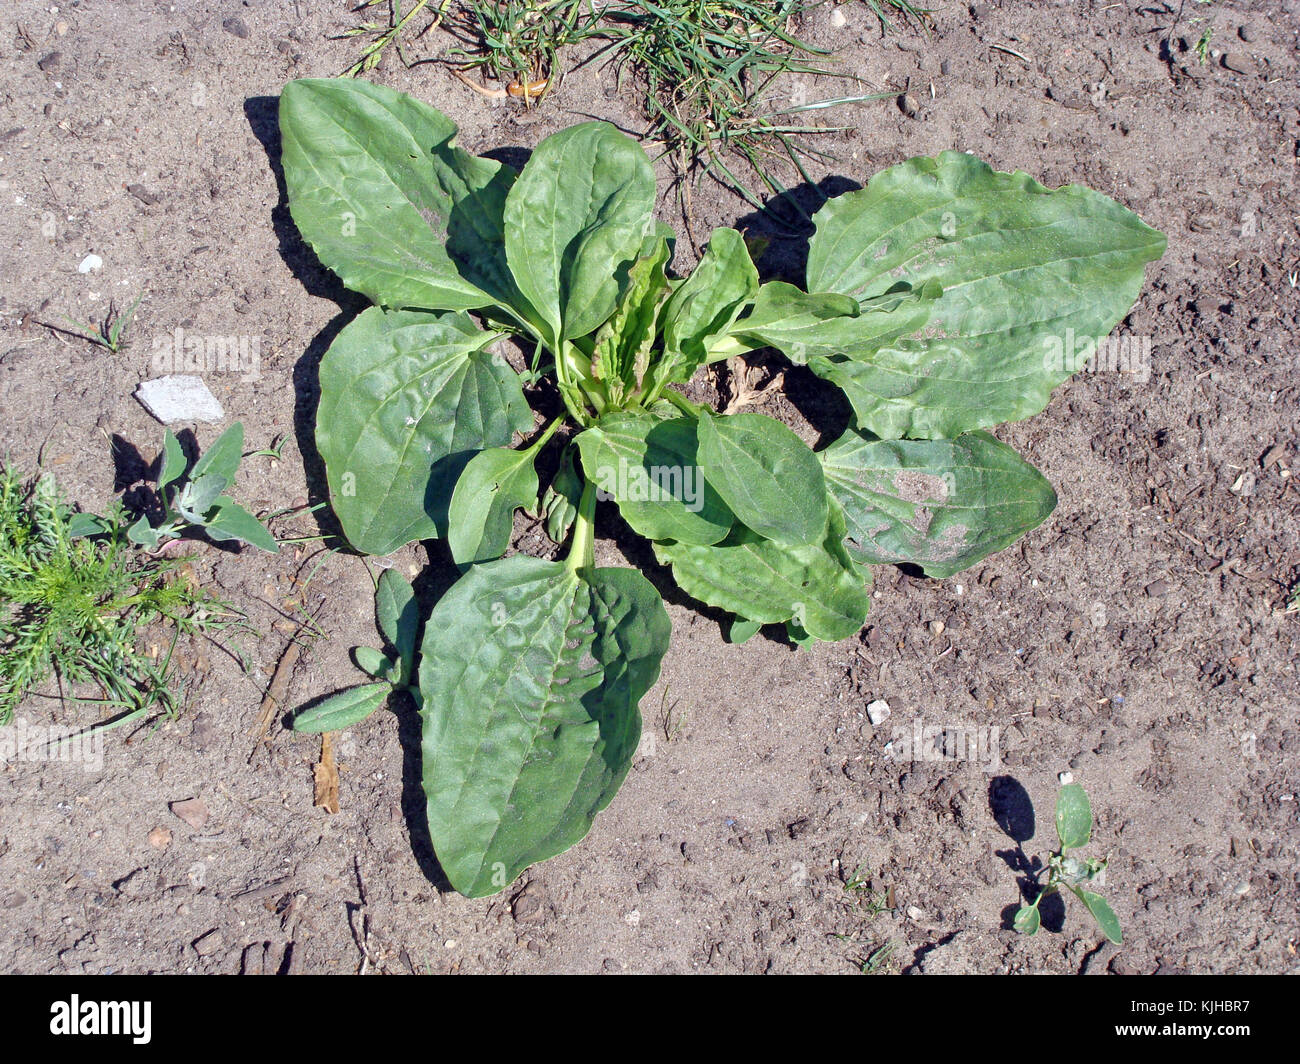 Greater plantain plant grows on road sandy soil close up Stock Photo